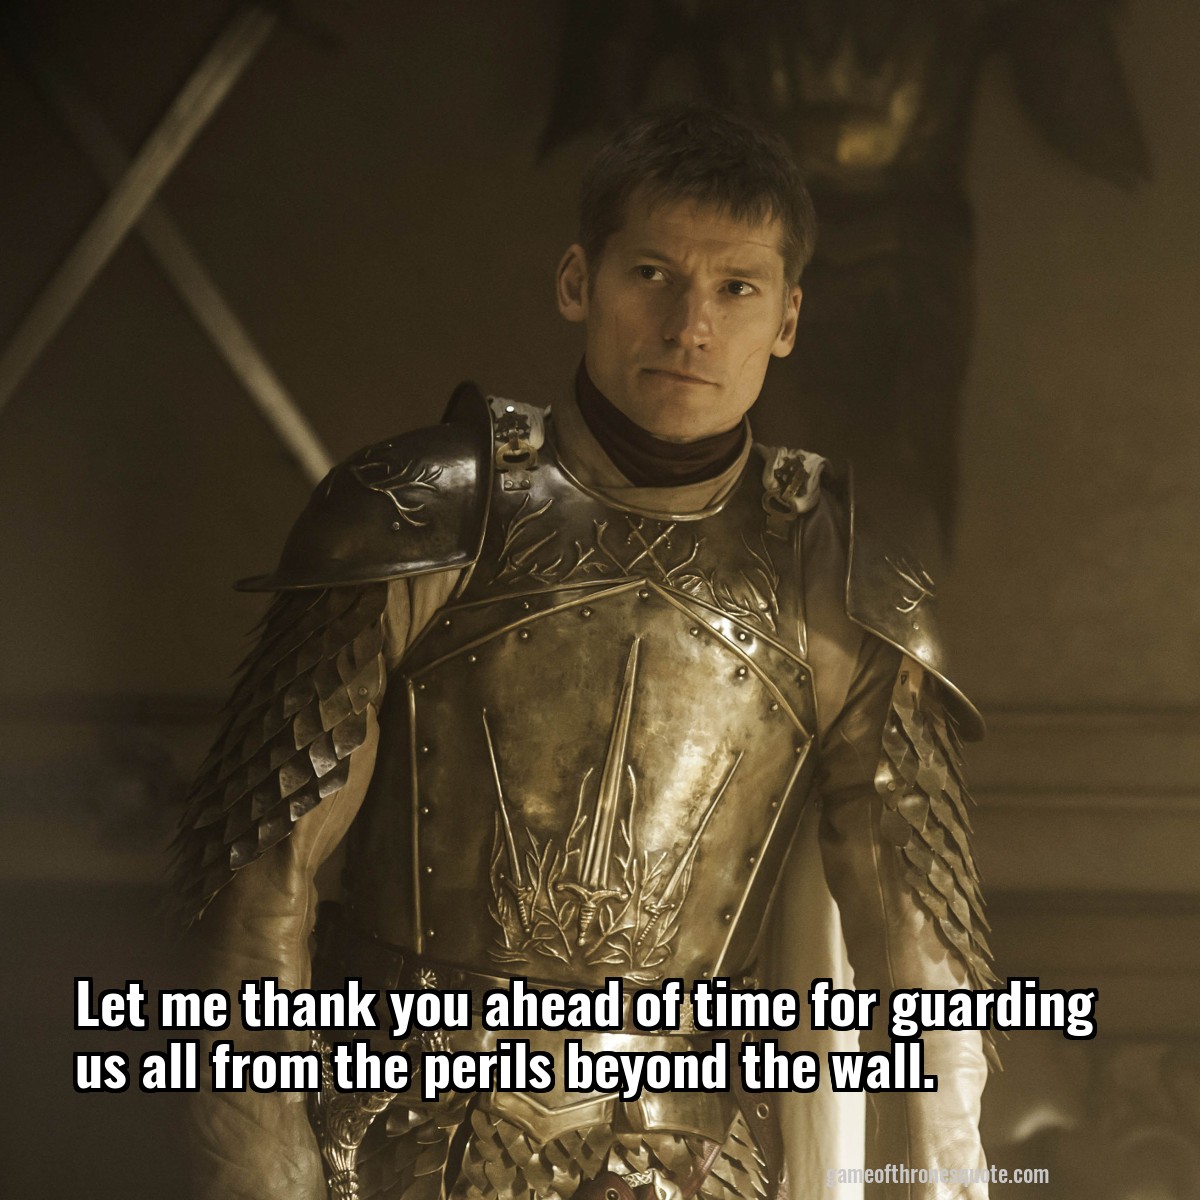 Let me thank you ahead of time for guarding us all from the perils beyond the wall.